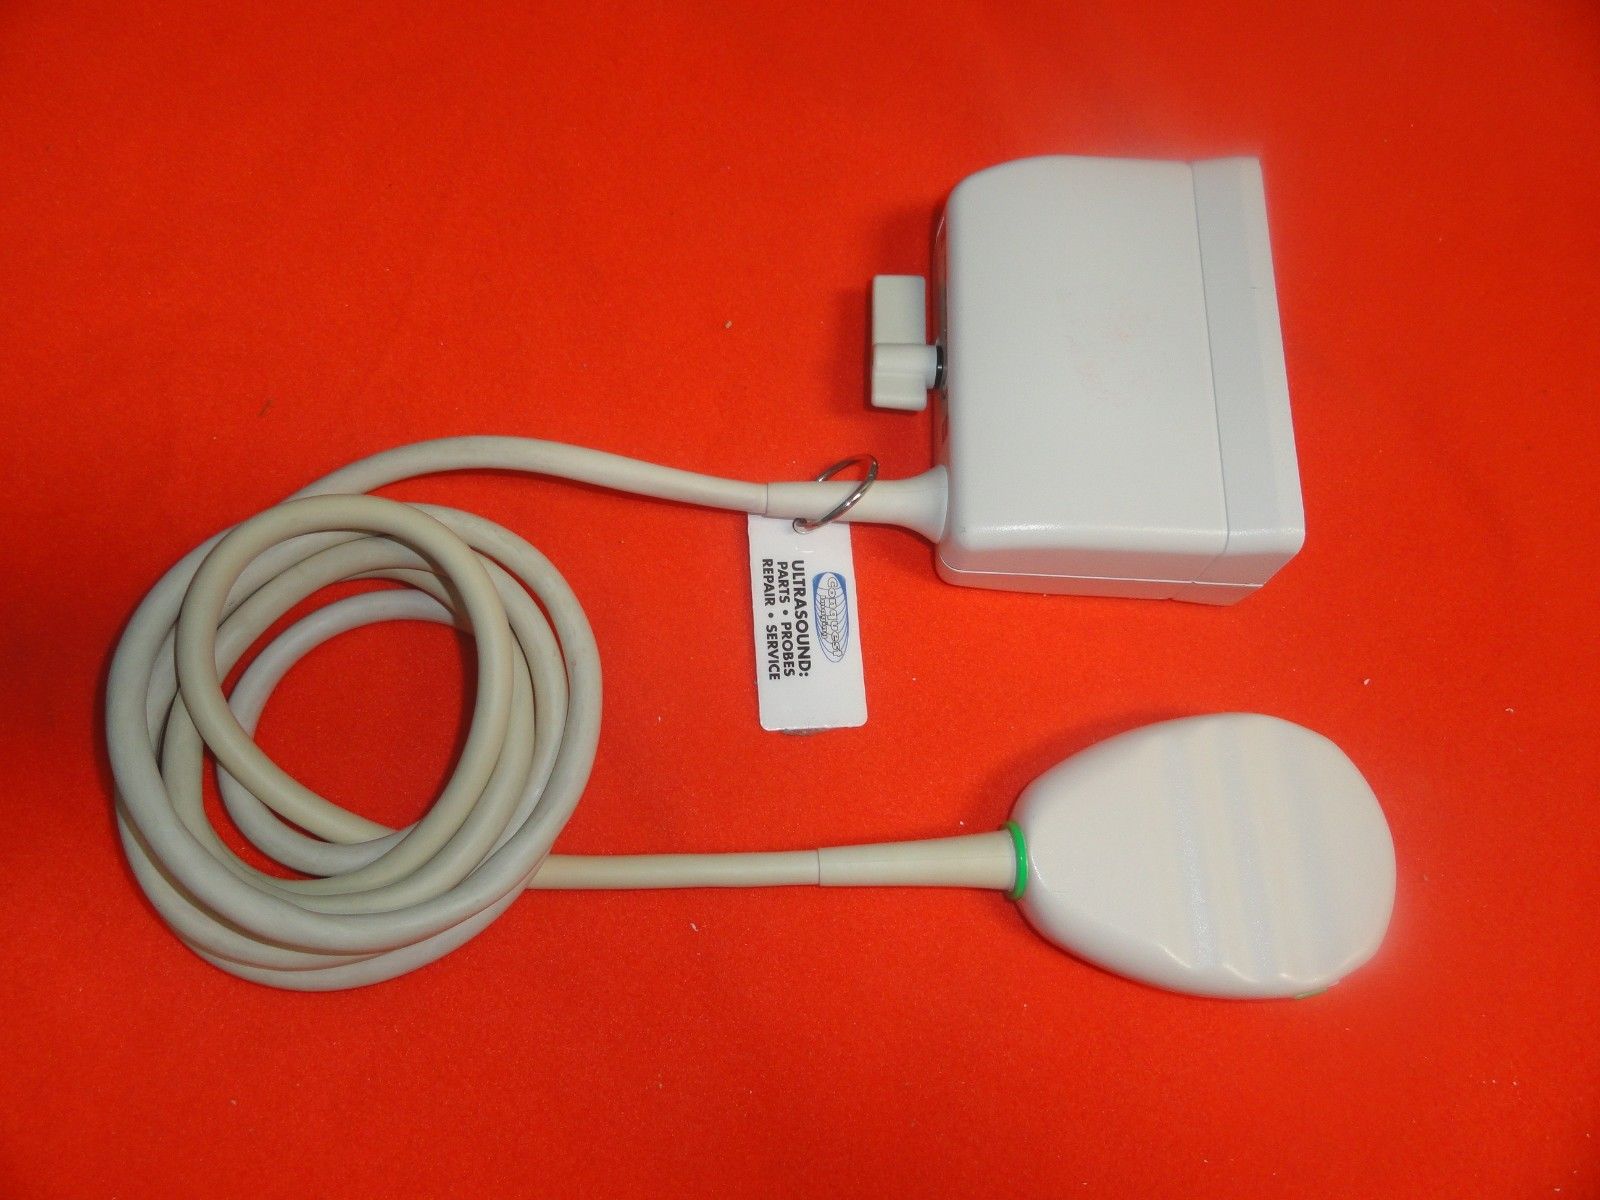 ATL Philips C7-4 40R Curved Array Probe for ATL UM9 HDI, HDI 1500 to 5000 (5956 DIAGNOSTIC ULTRASOUND MACHINES FOR SALE